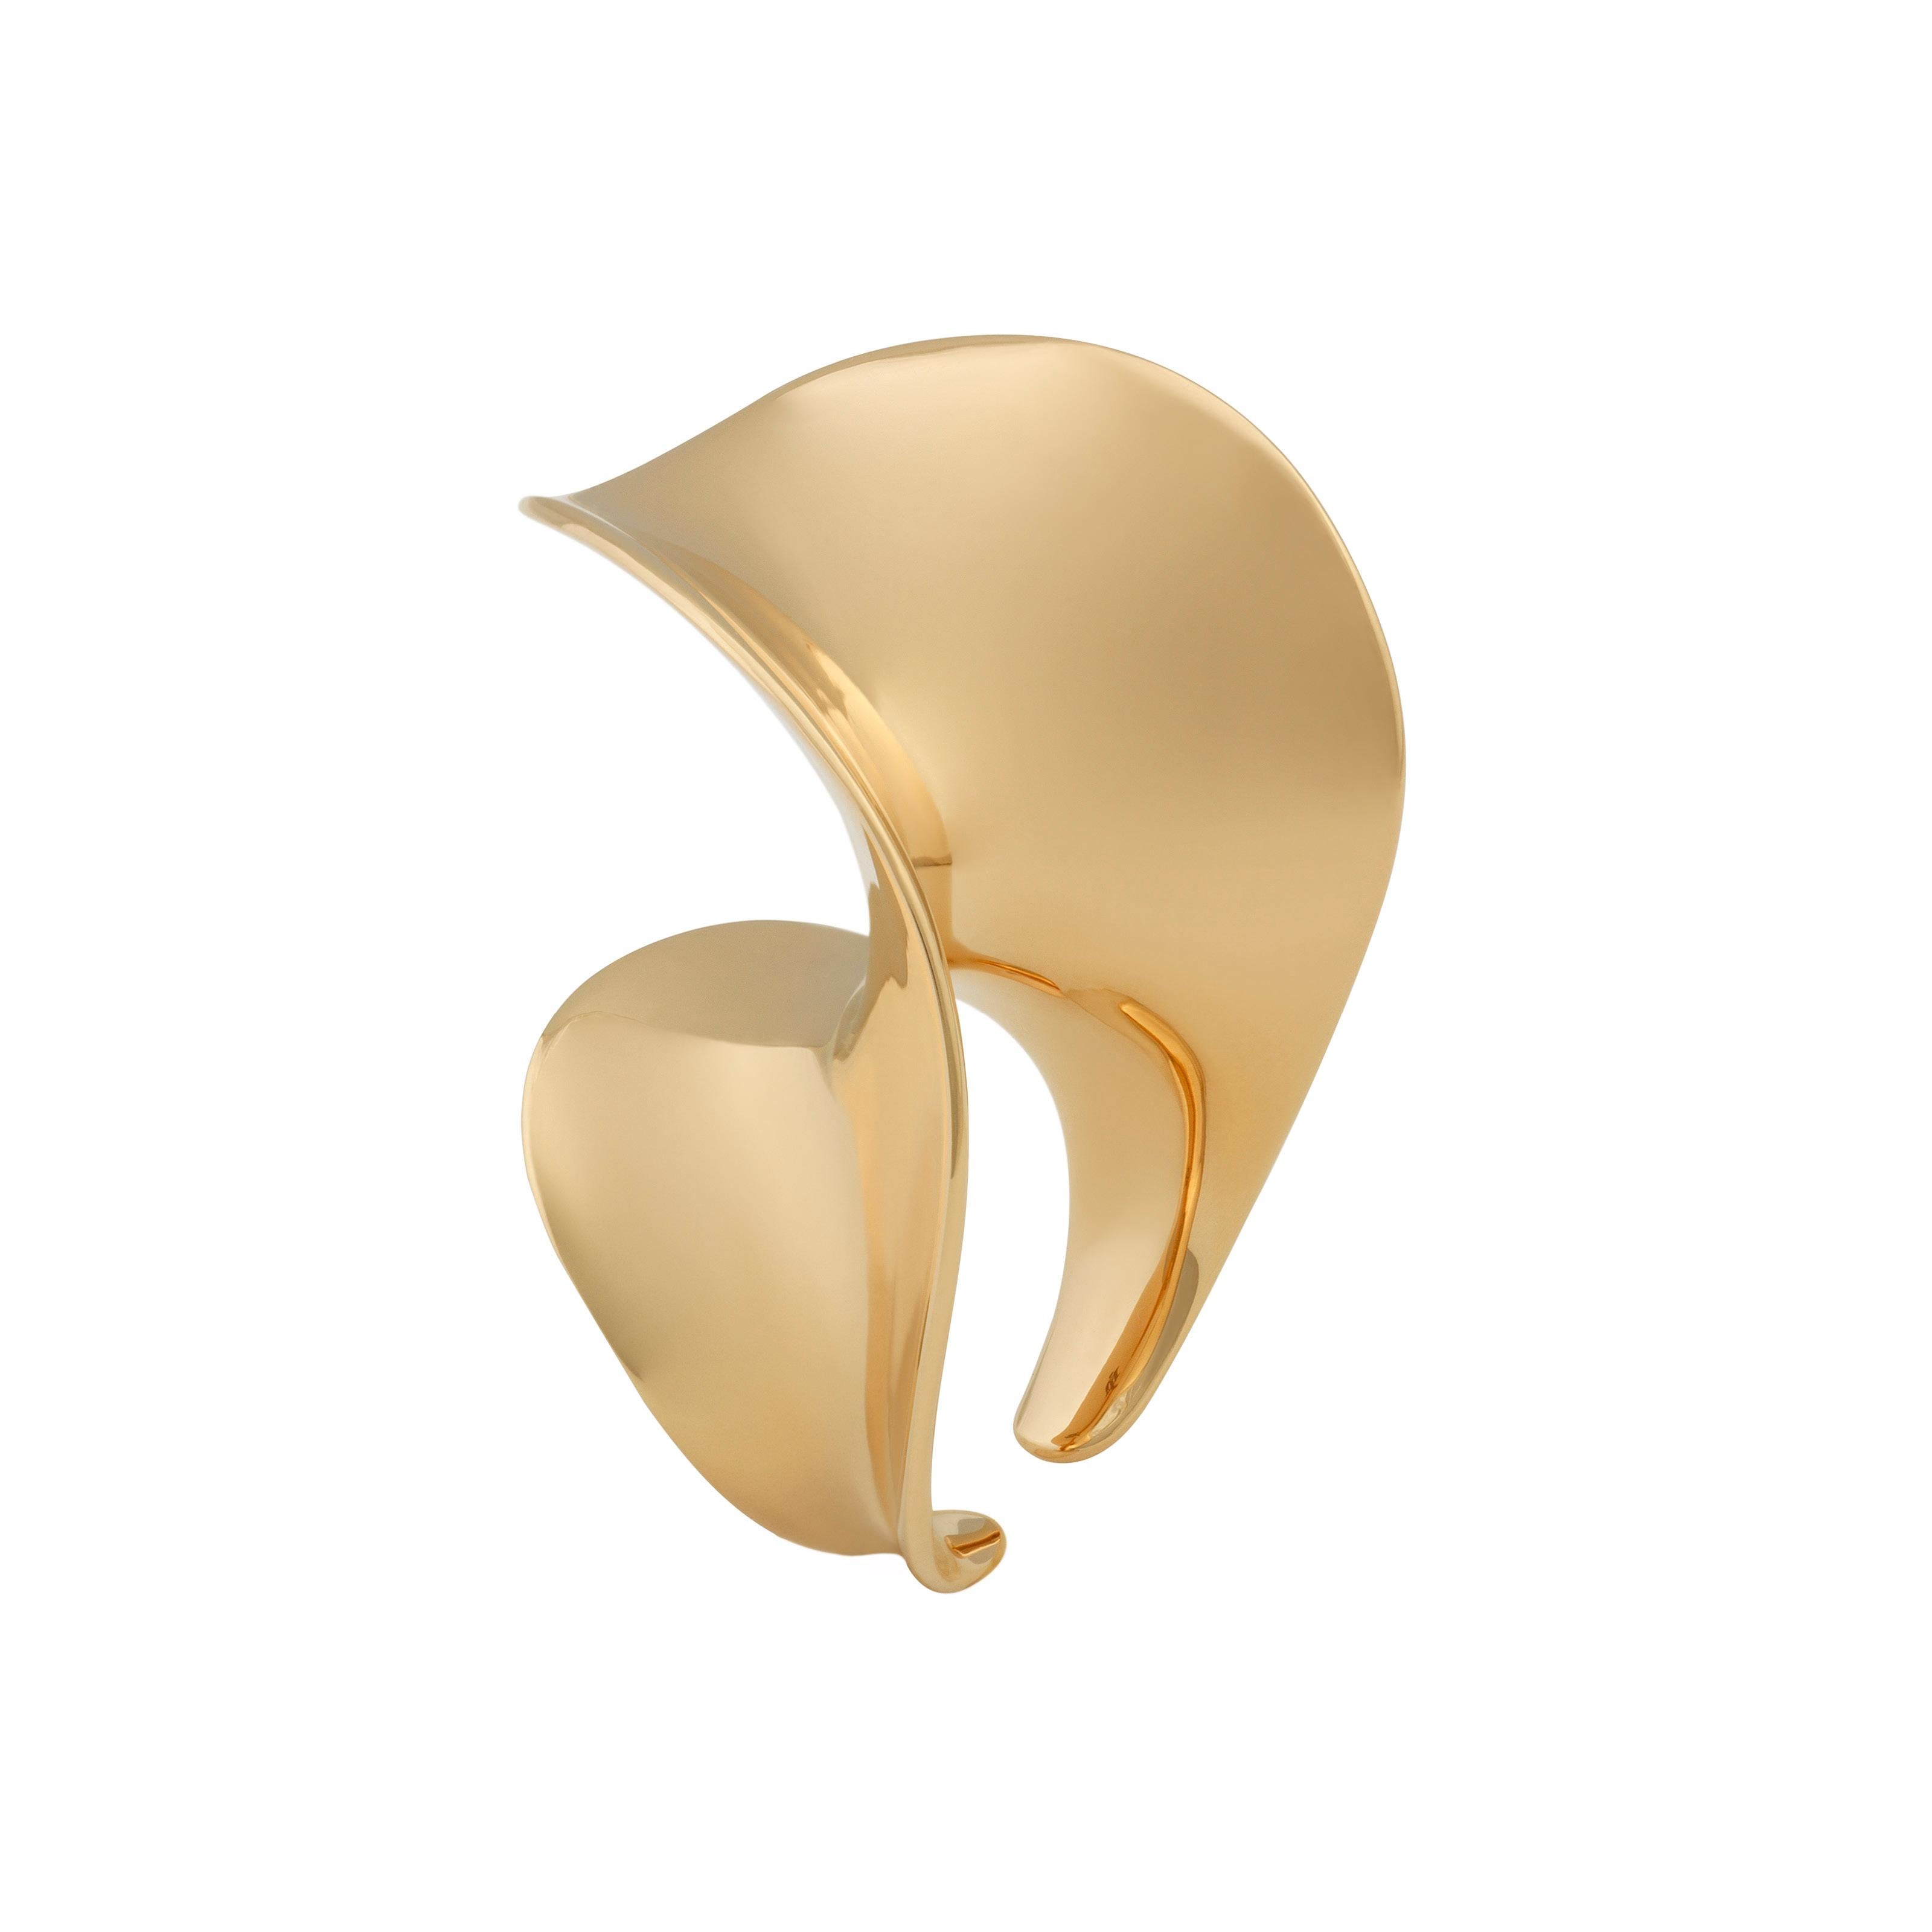 Nathalie Jean Contemporary Rose Gold Limited Edition Sculpture Cocktail Ring 2